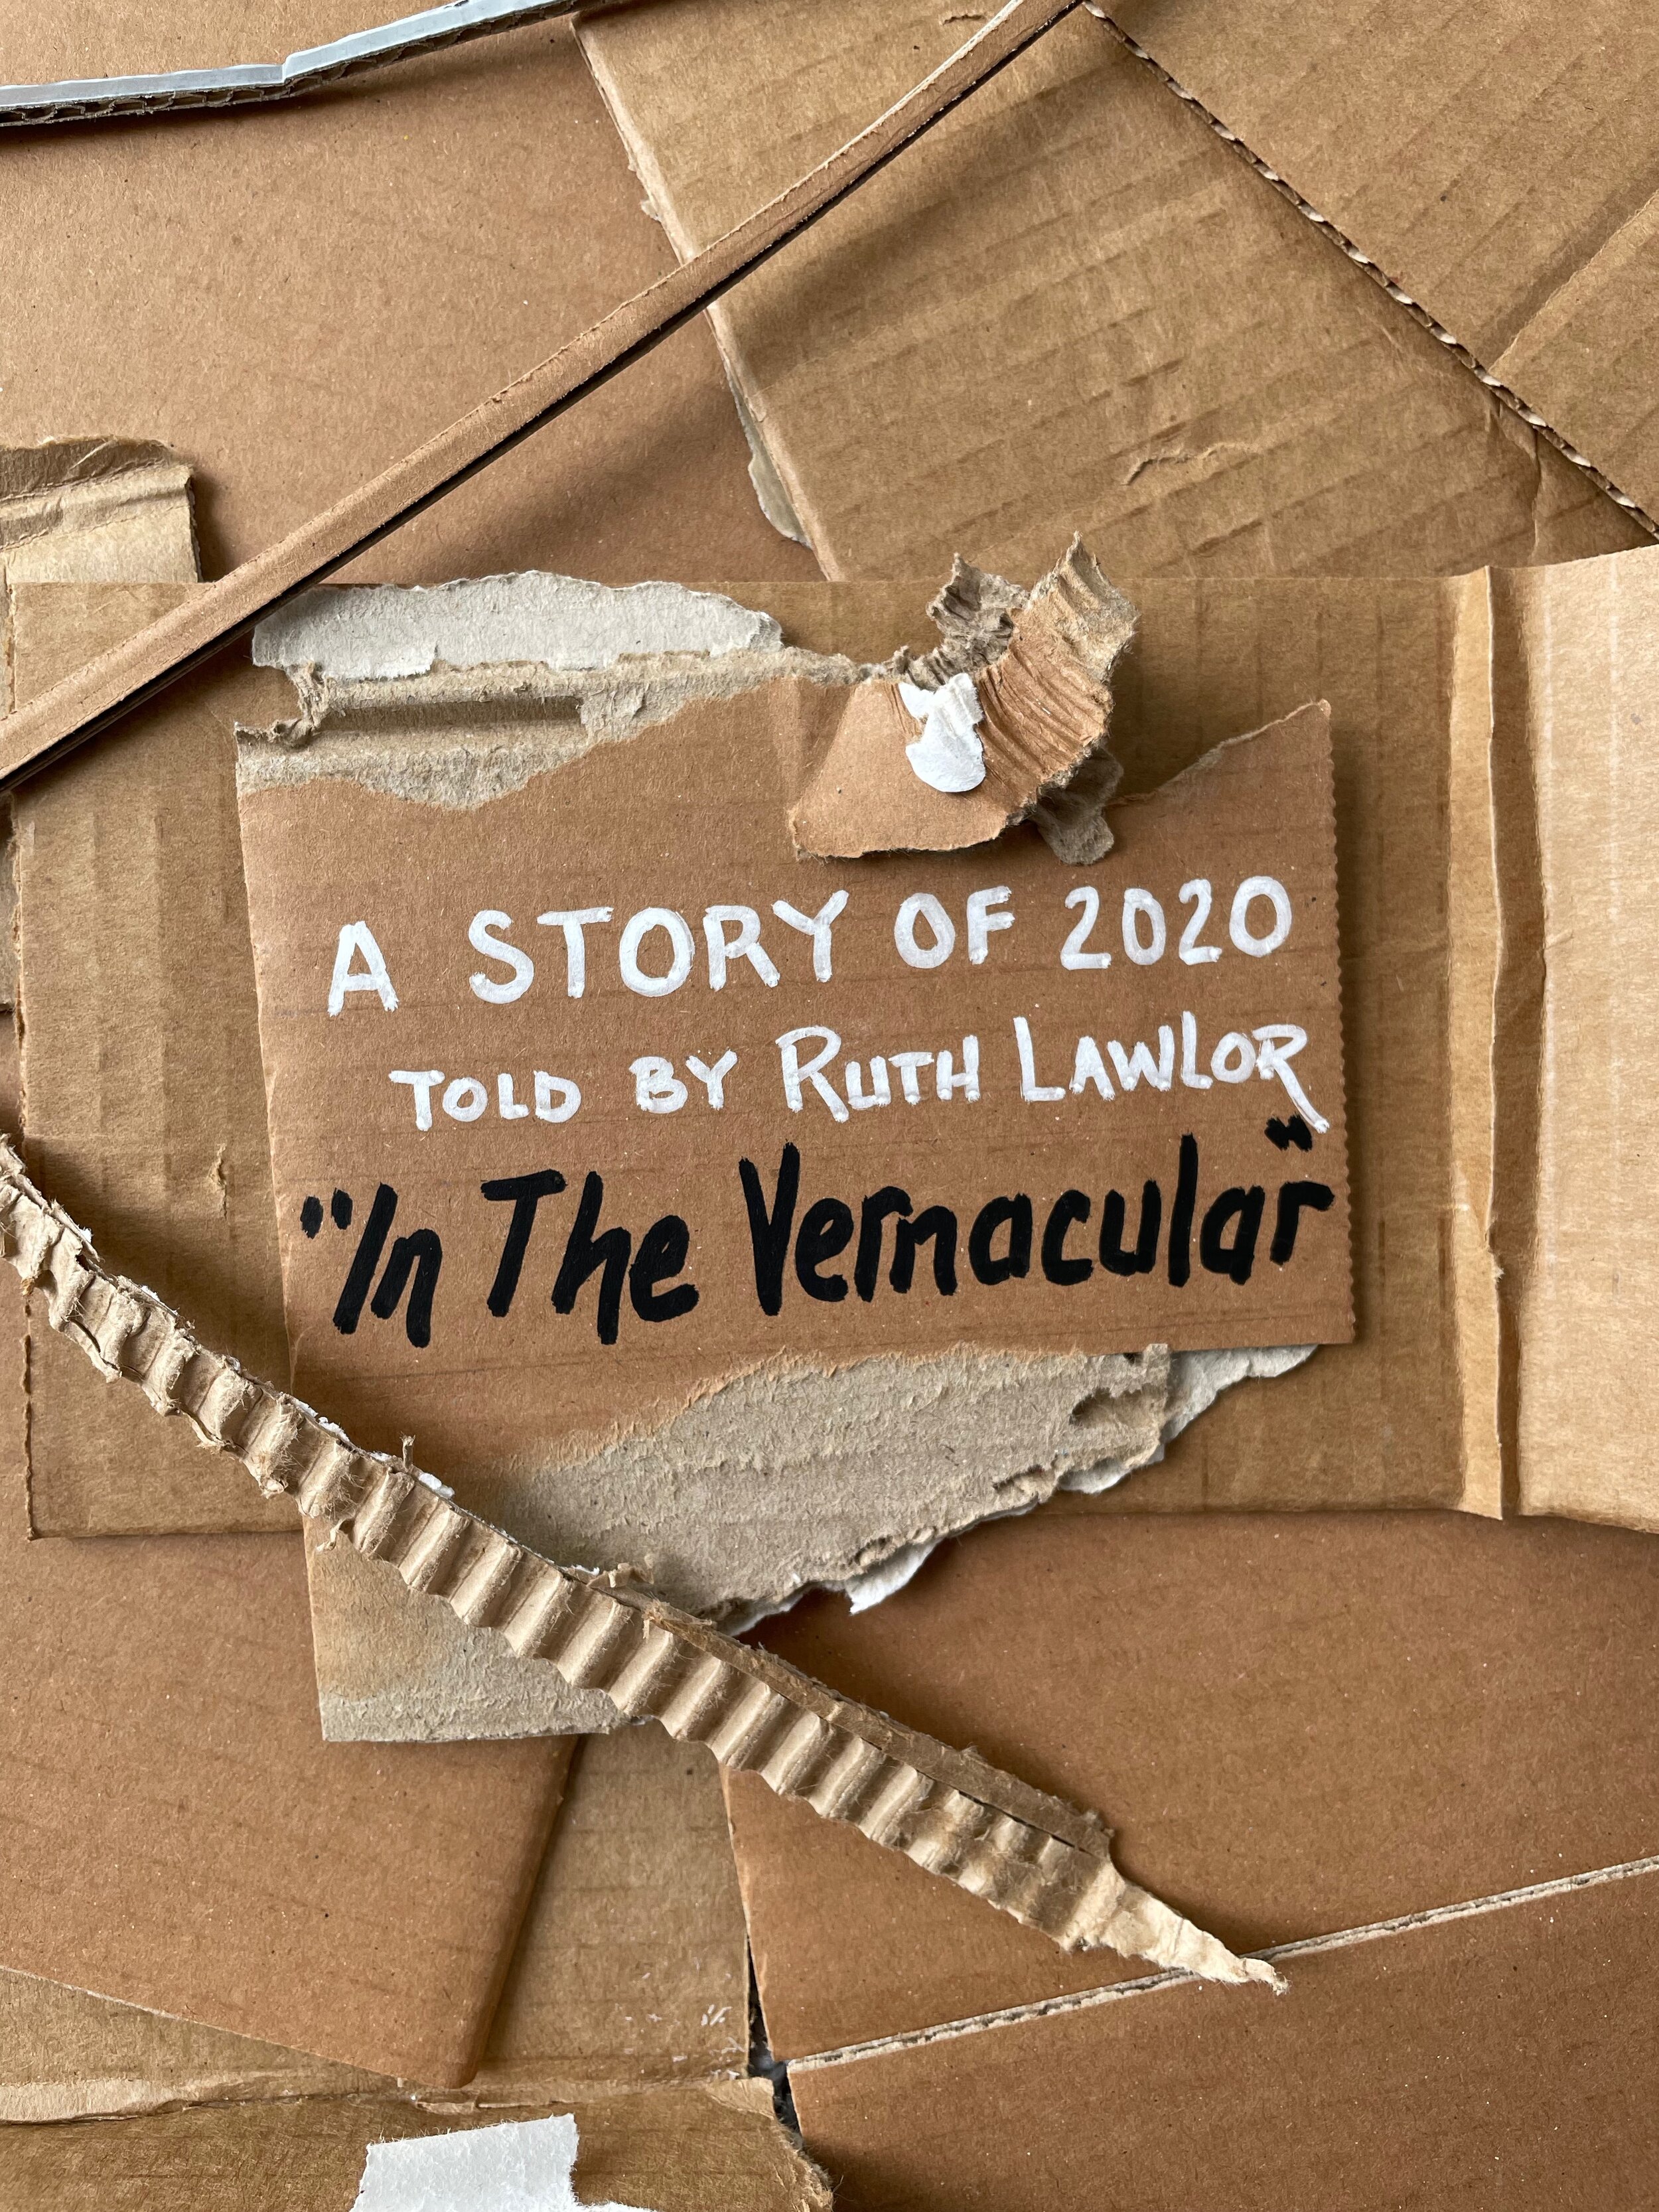 IN THE VERNACULAR, a story of 2020 told by Ruth Lawlor